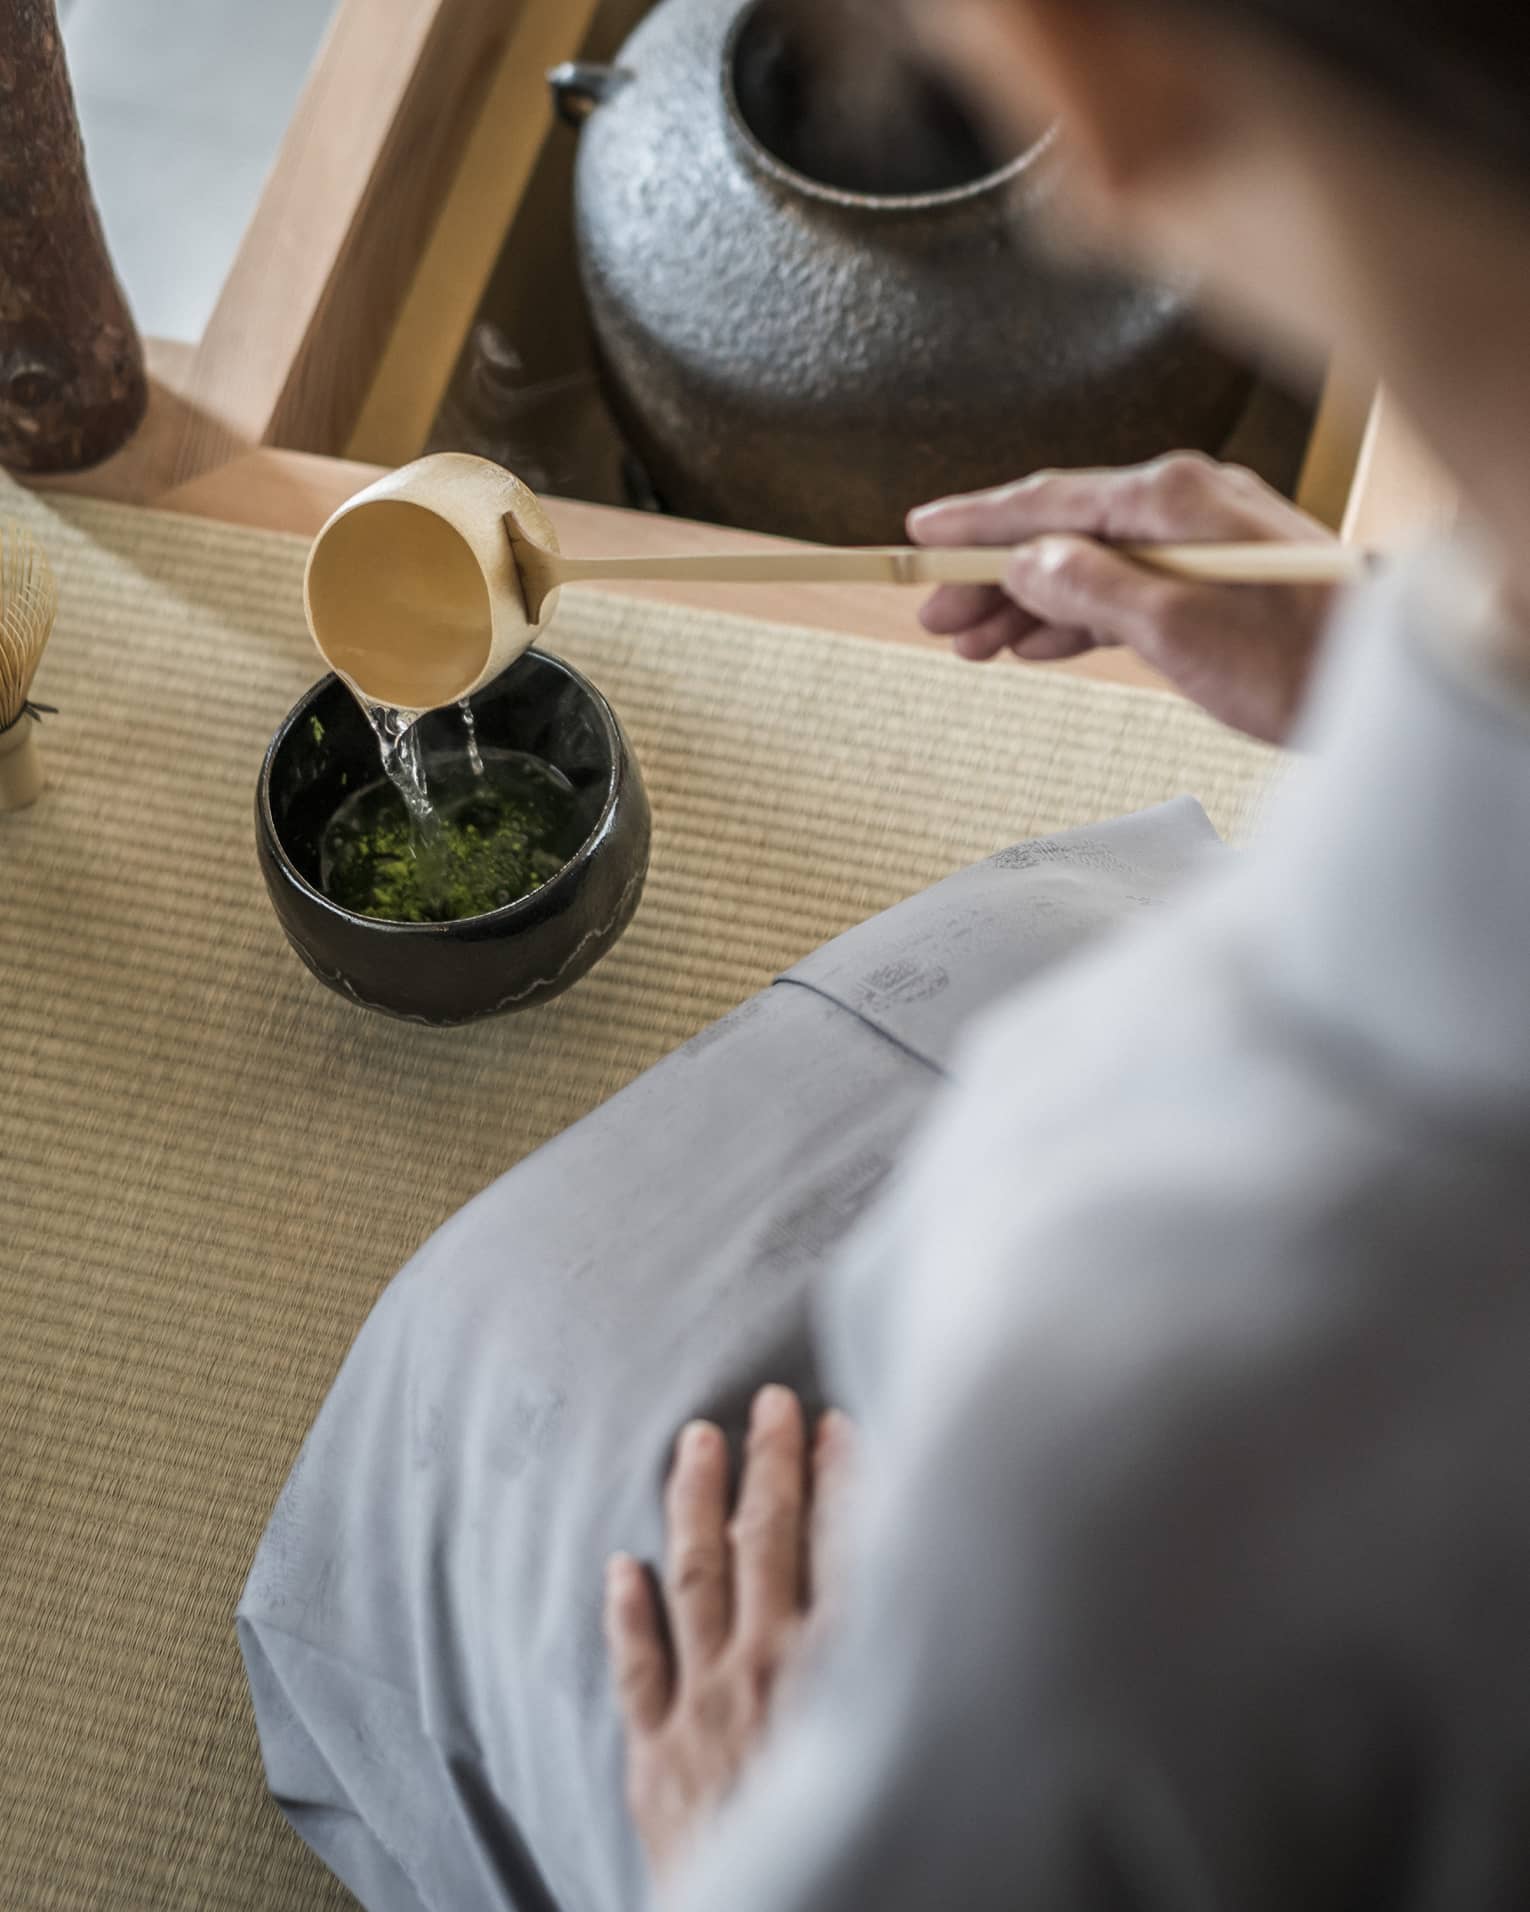 Woman kneels and pours tea from ladle during Tea Ceremony